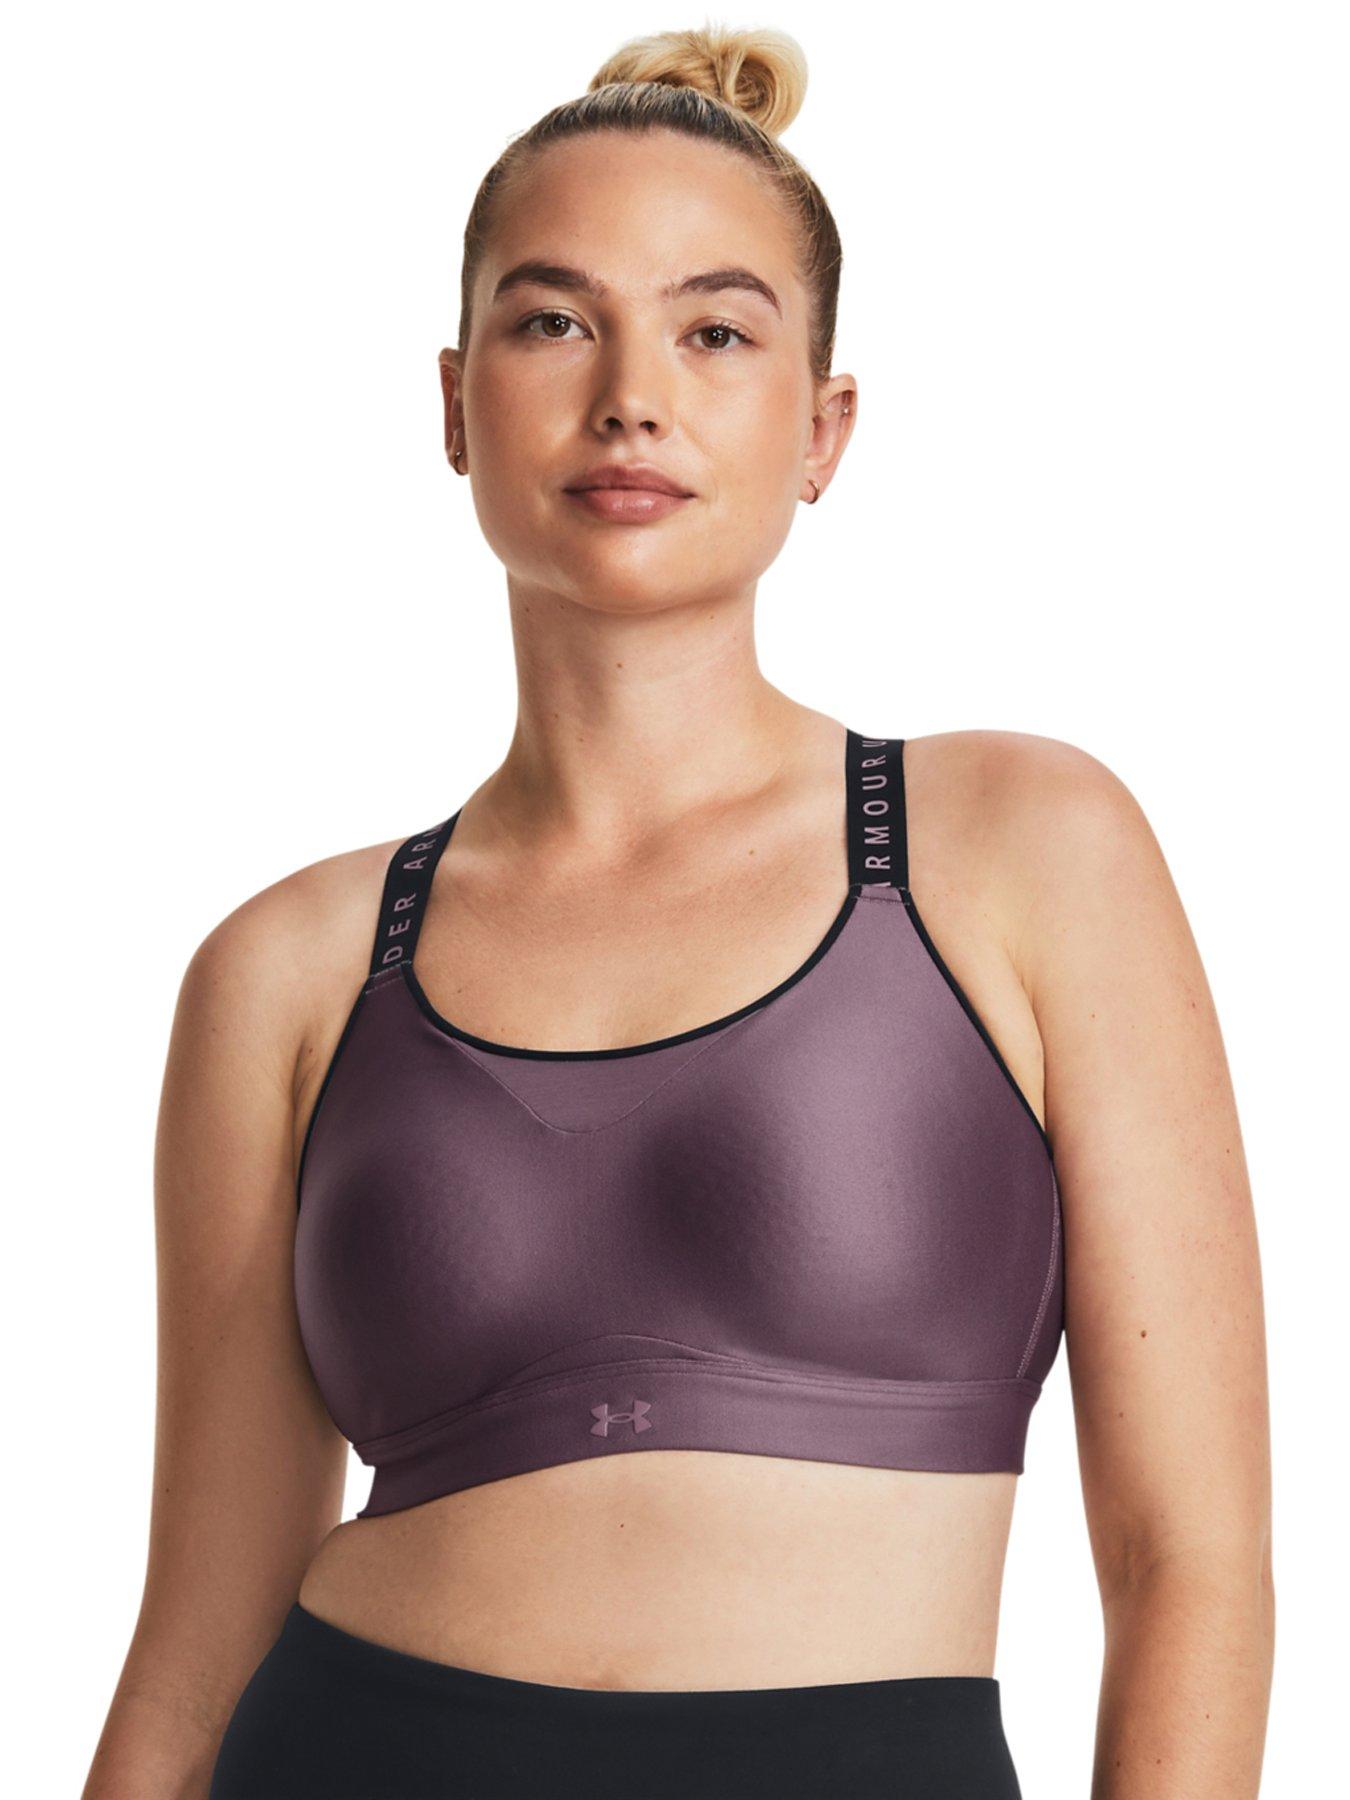 UNDER ARMOUR Womens Training Infinity High Bra D to DD cup - Black/White